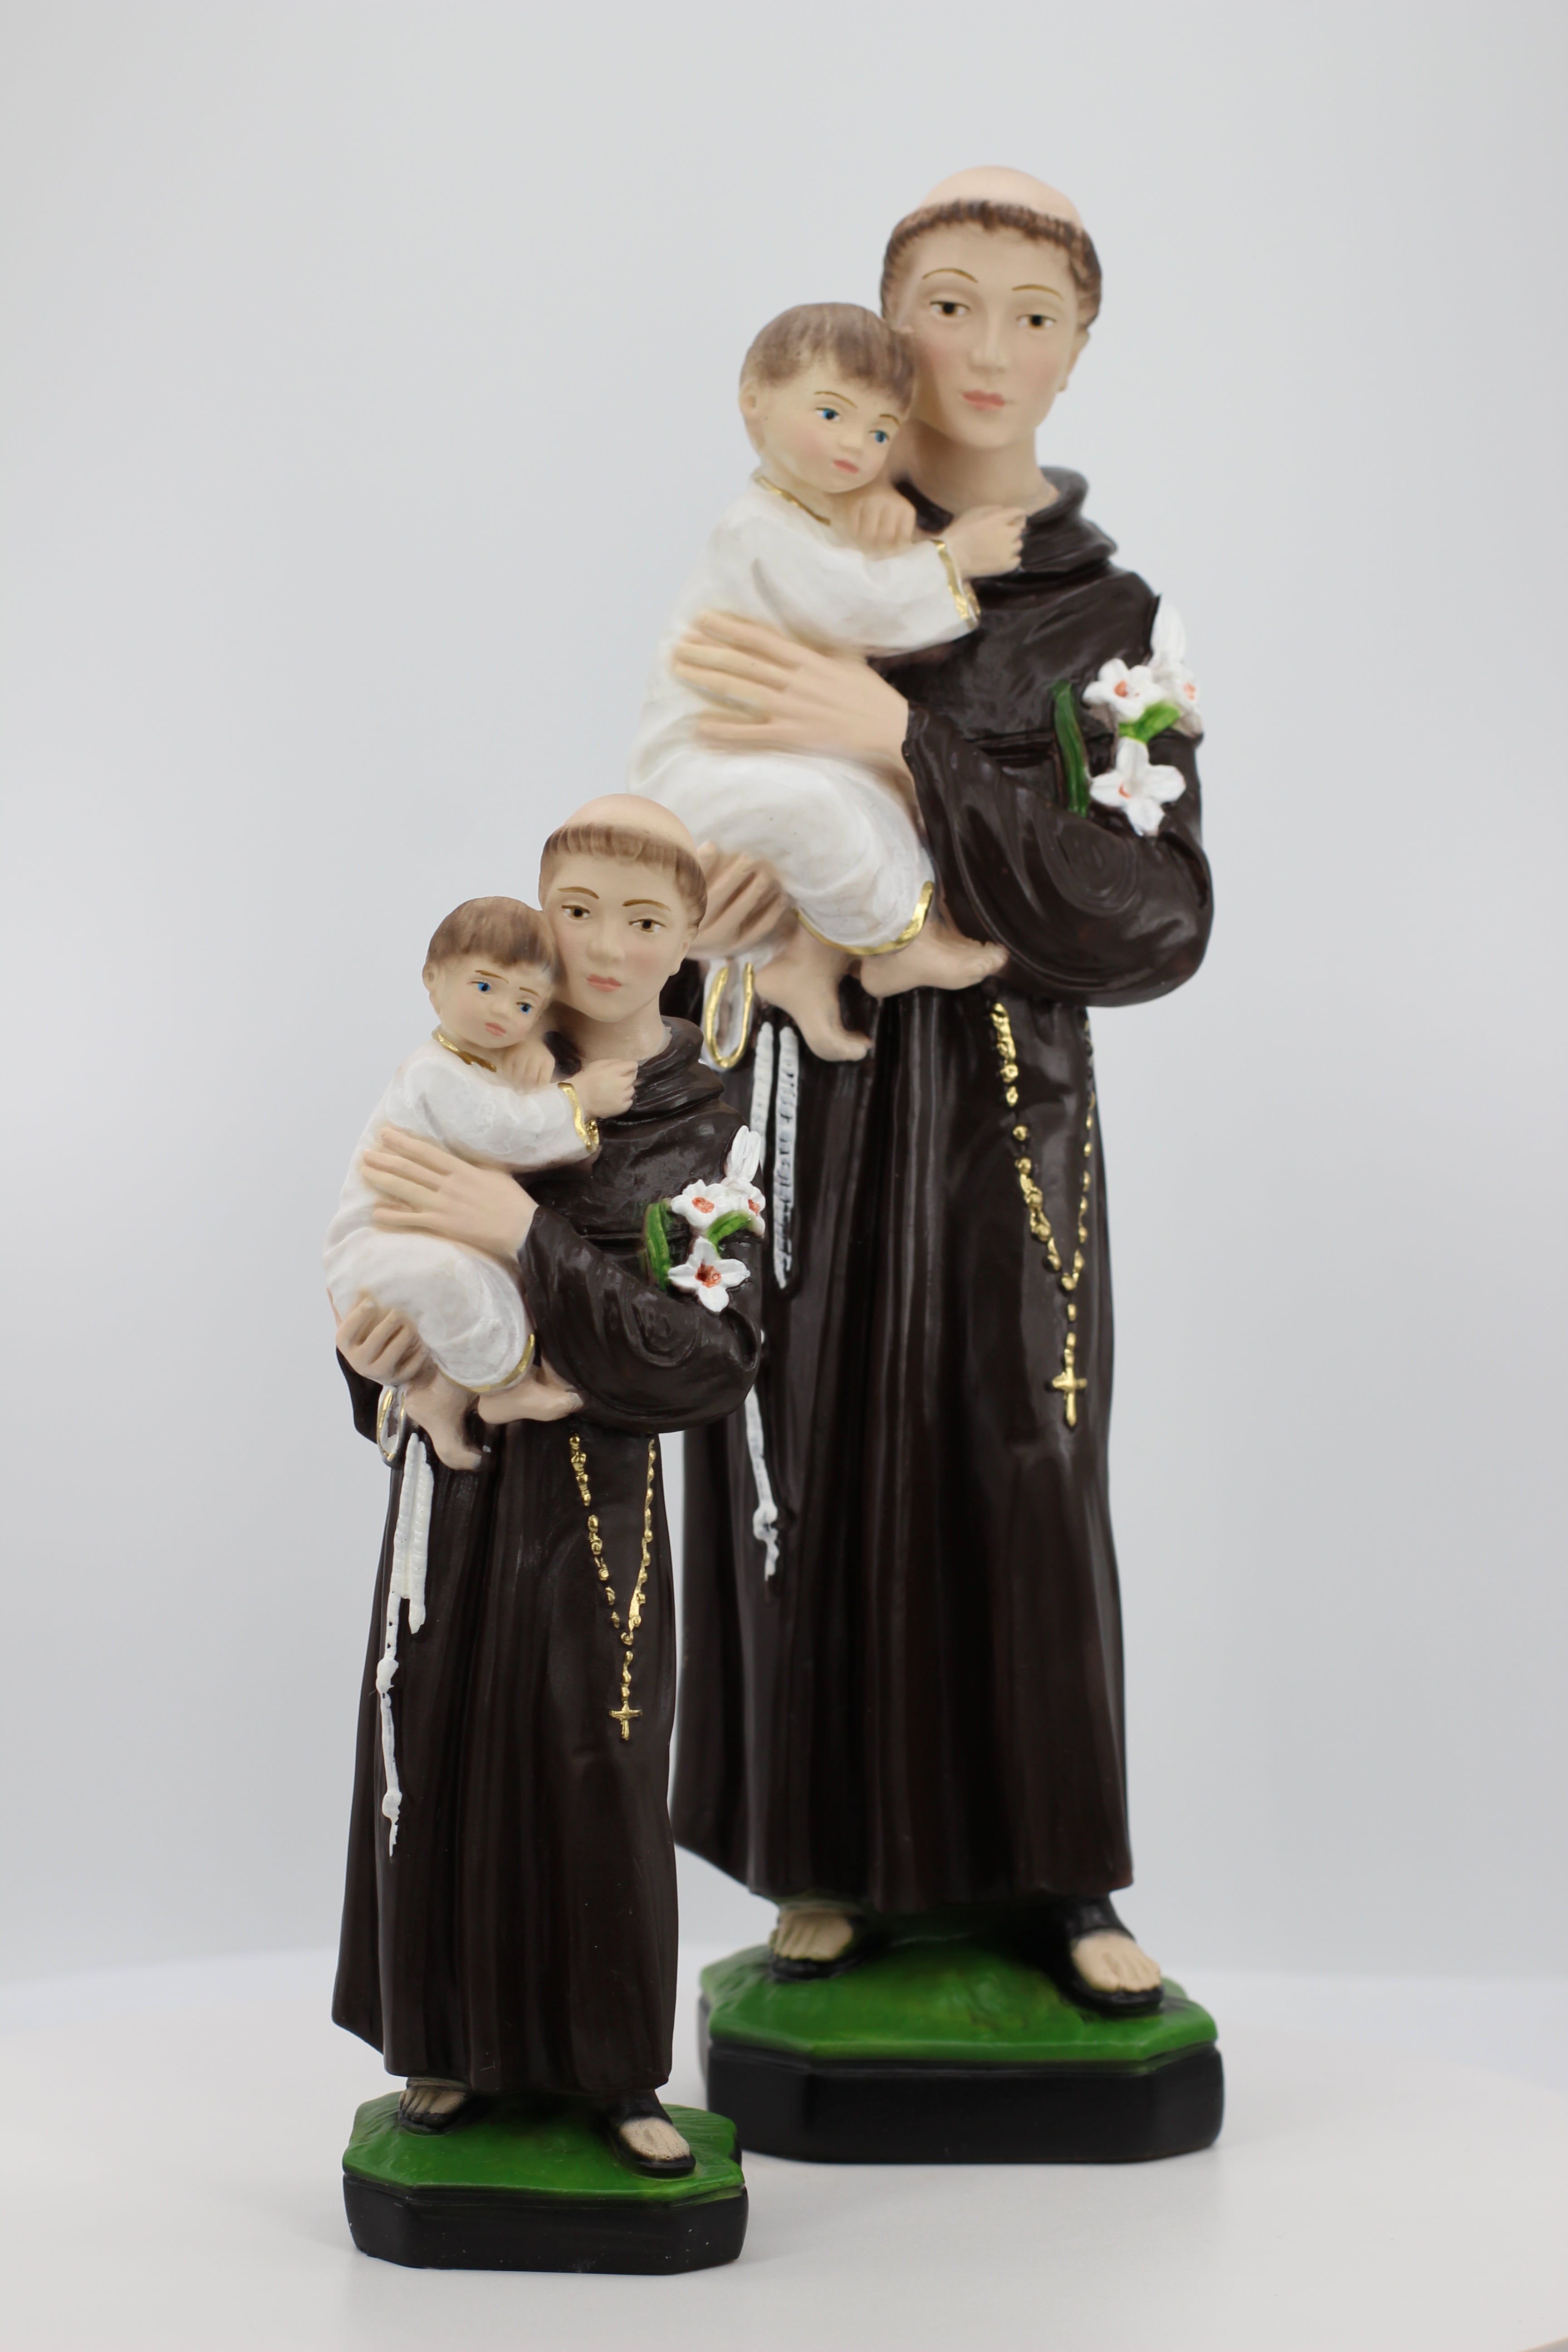 The Faith Gift Shop Saint Anthony- Hand Painted in Italy - Our Tuscany Collection - San Antonio